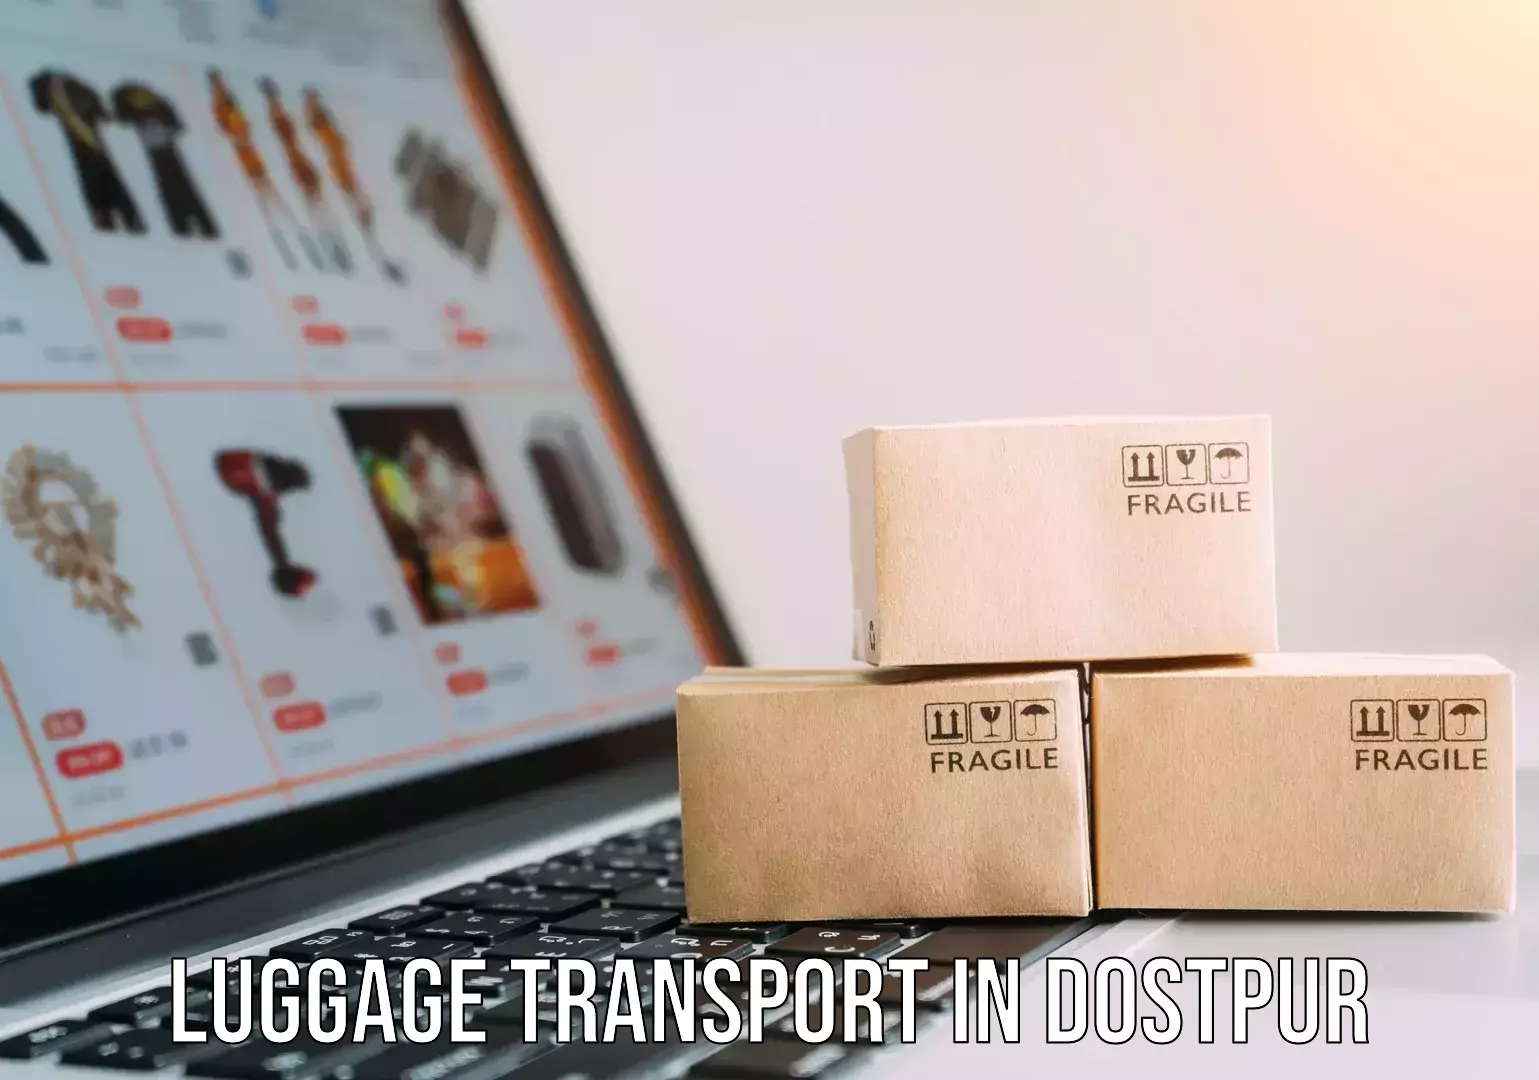 Luggage transport rates in Dostpur